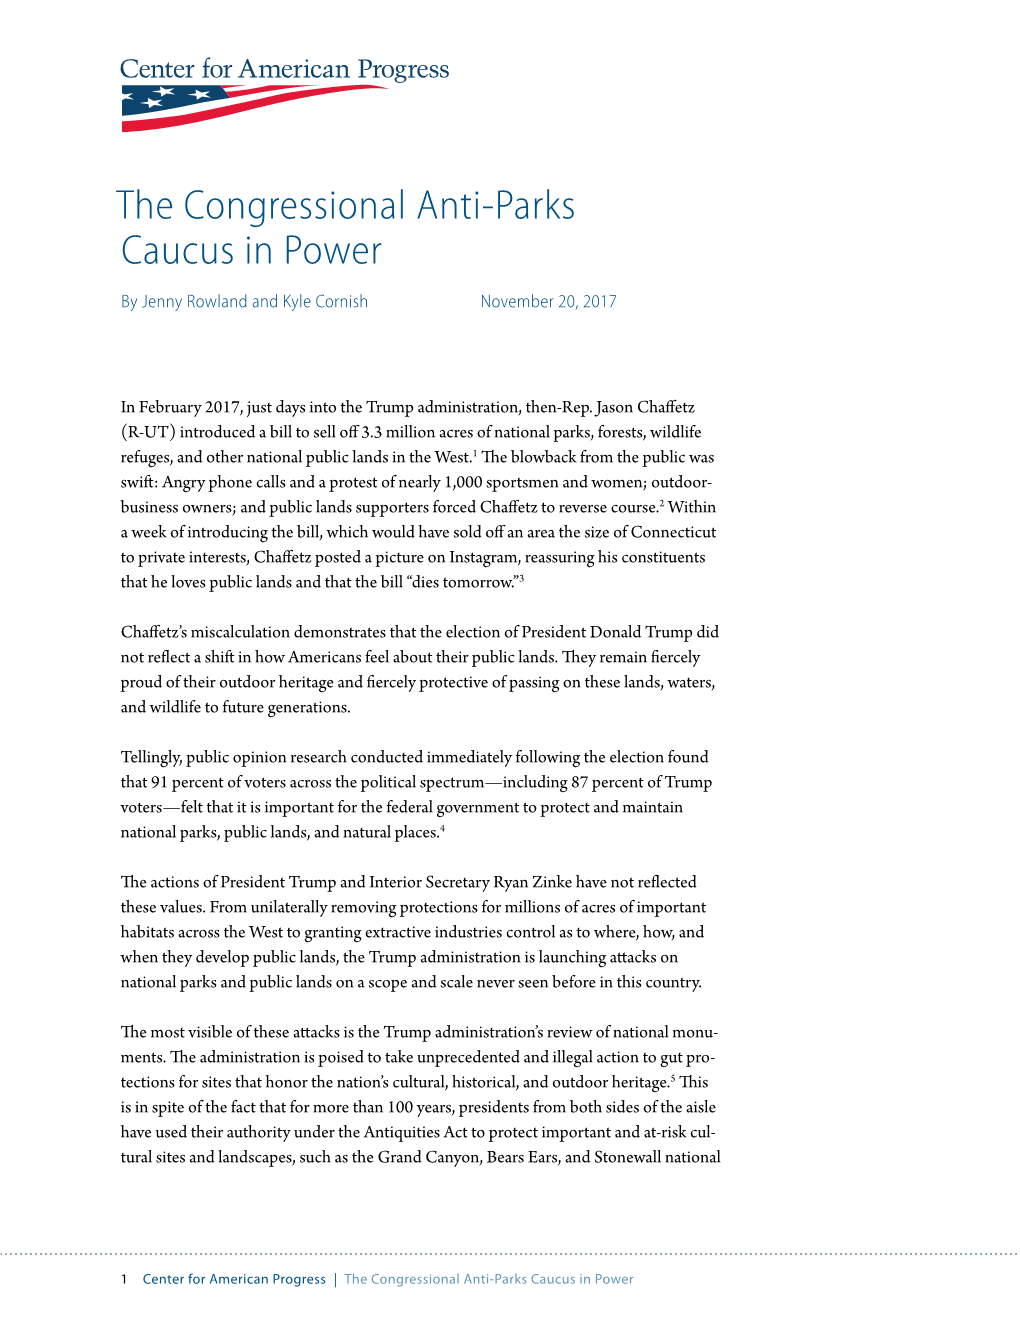 The Congressional Anti-Parks Caucus in Power